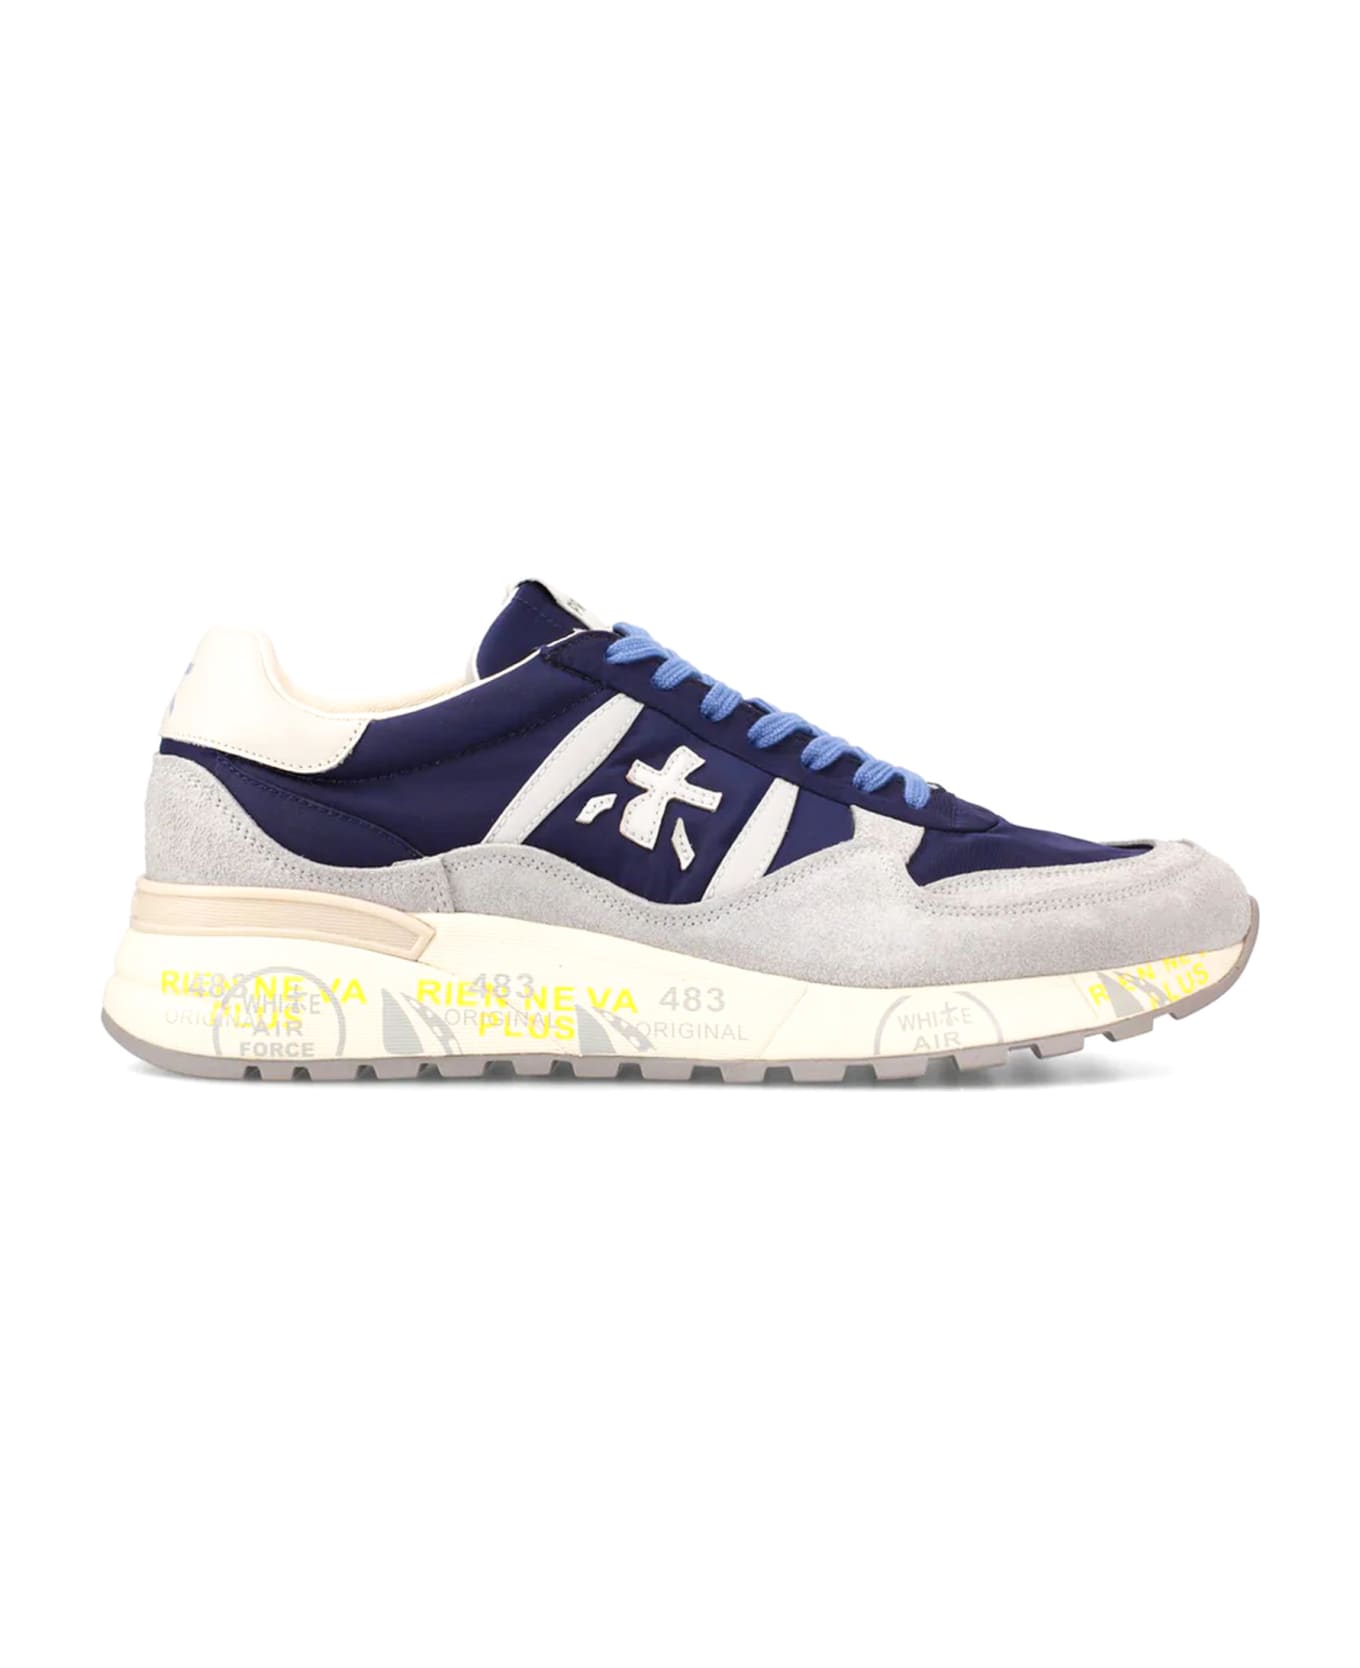 Premiata Landeck Sneakers In Blue Suede And Fabric - Blue/grey